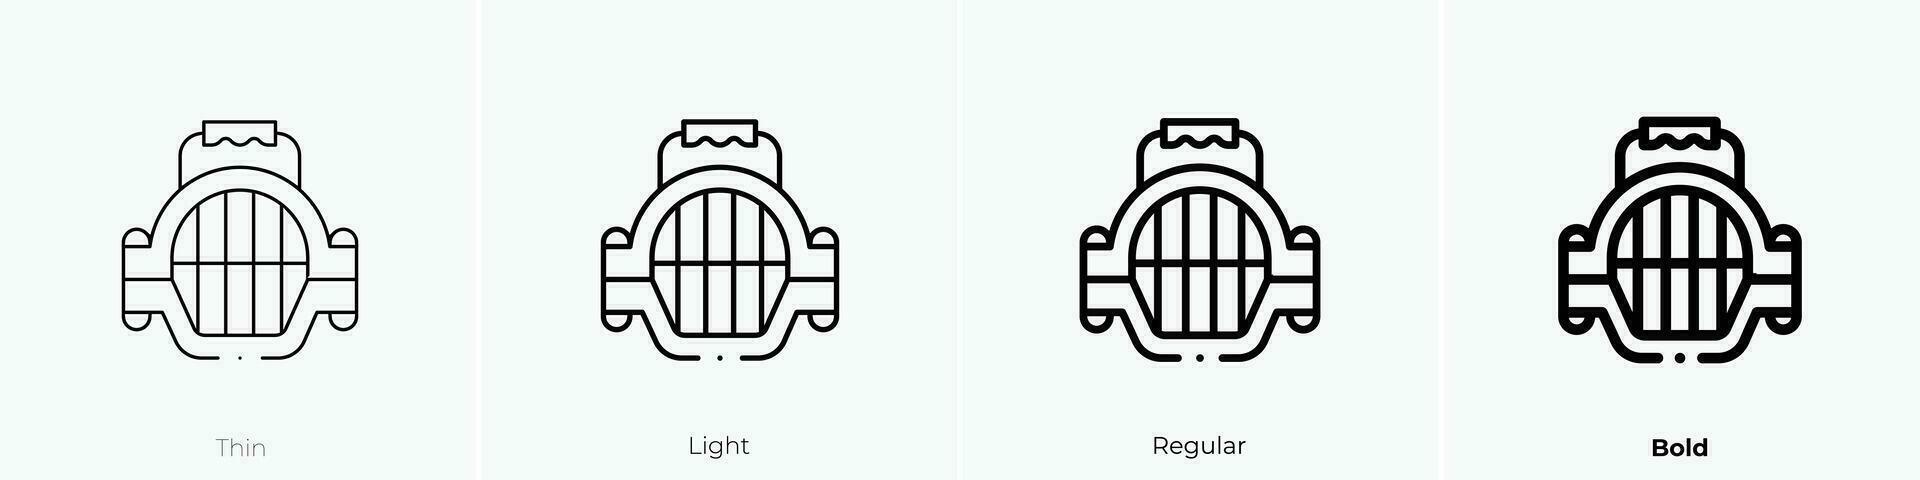 pet carrier icon. Thin, Light, Regular And Bold style design isolated on white background vector